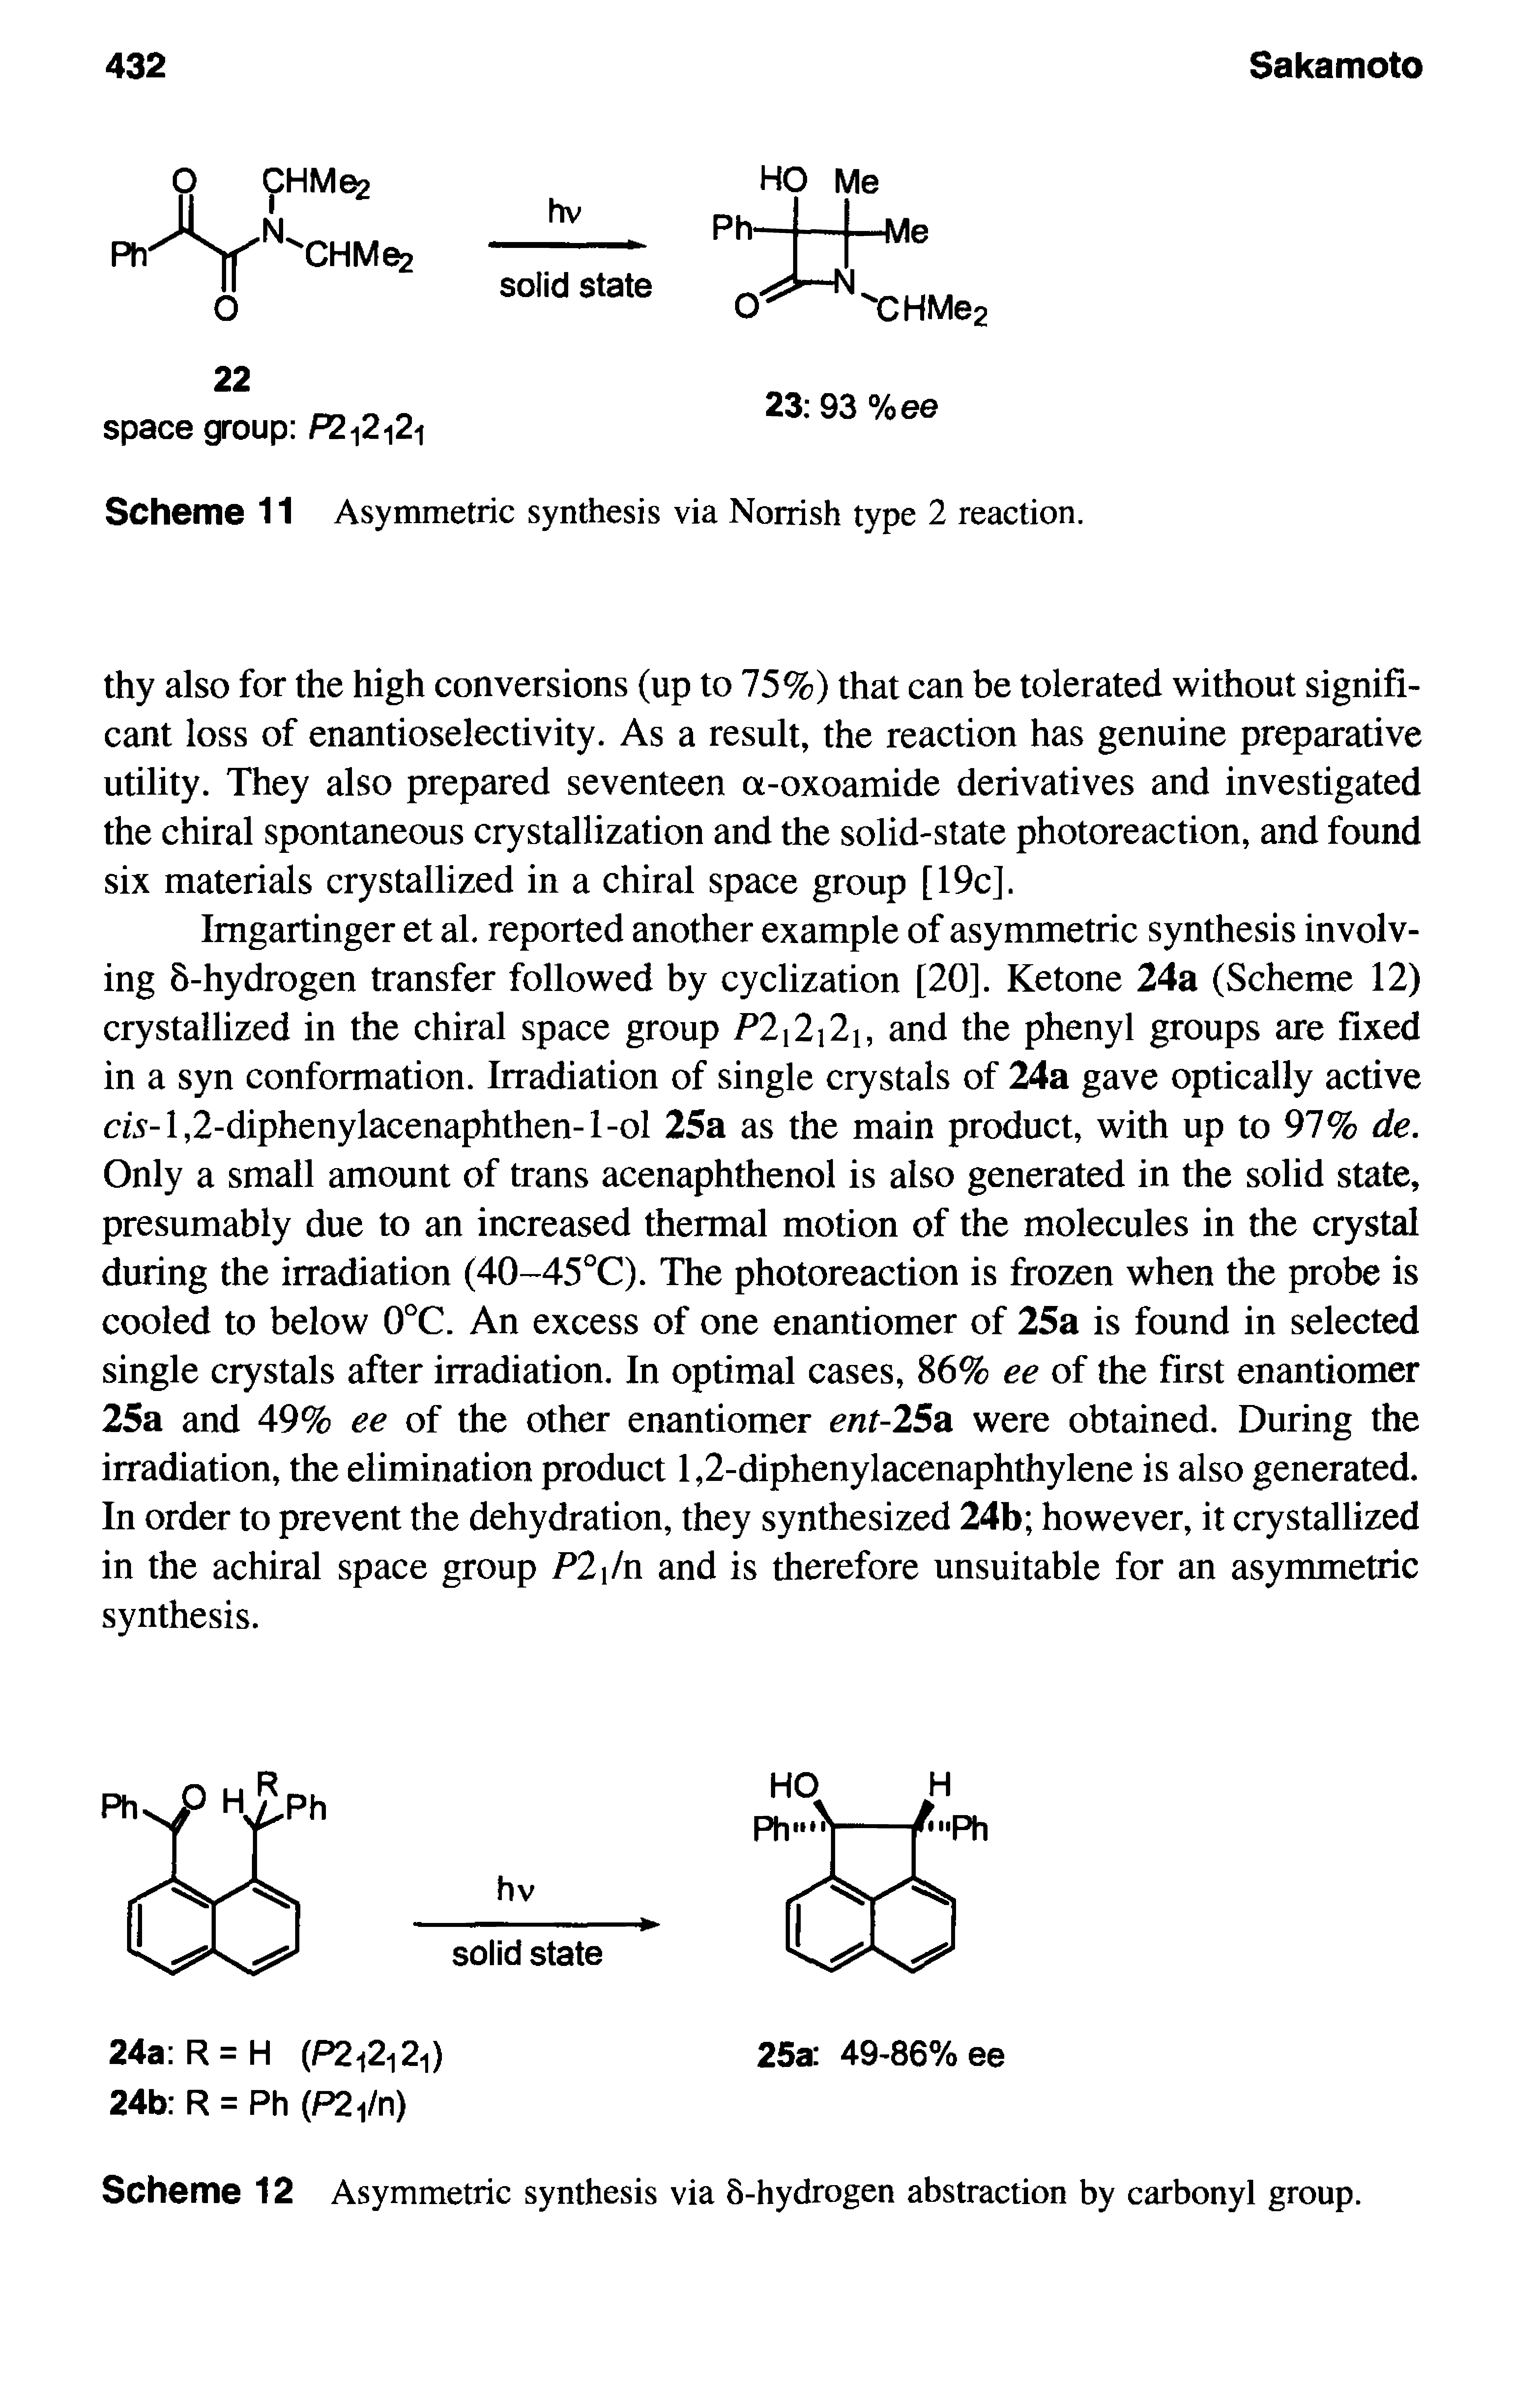 Scheme 12 Asymmetric synthesis via 8-hydrogen abstraction by carbonyl group.